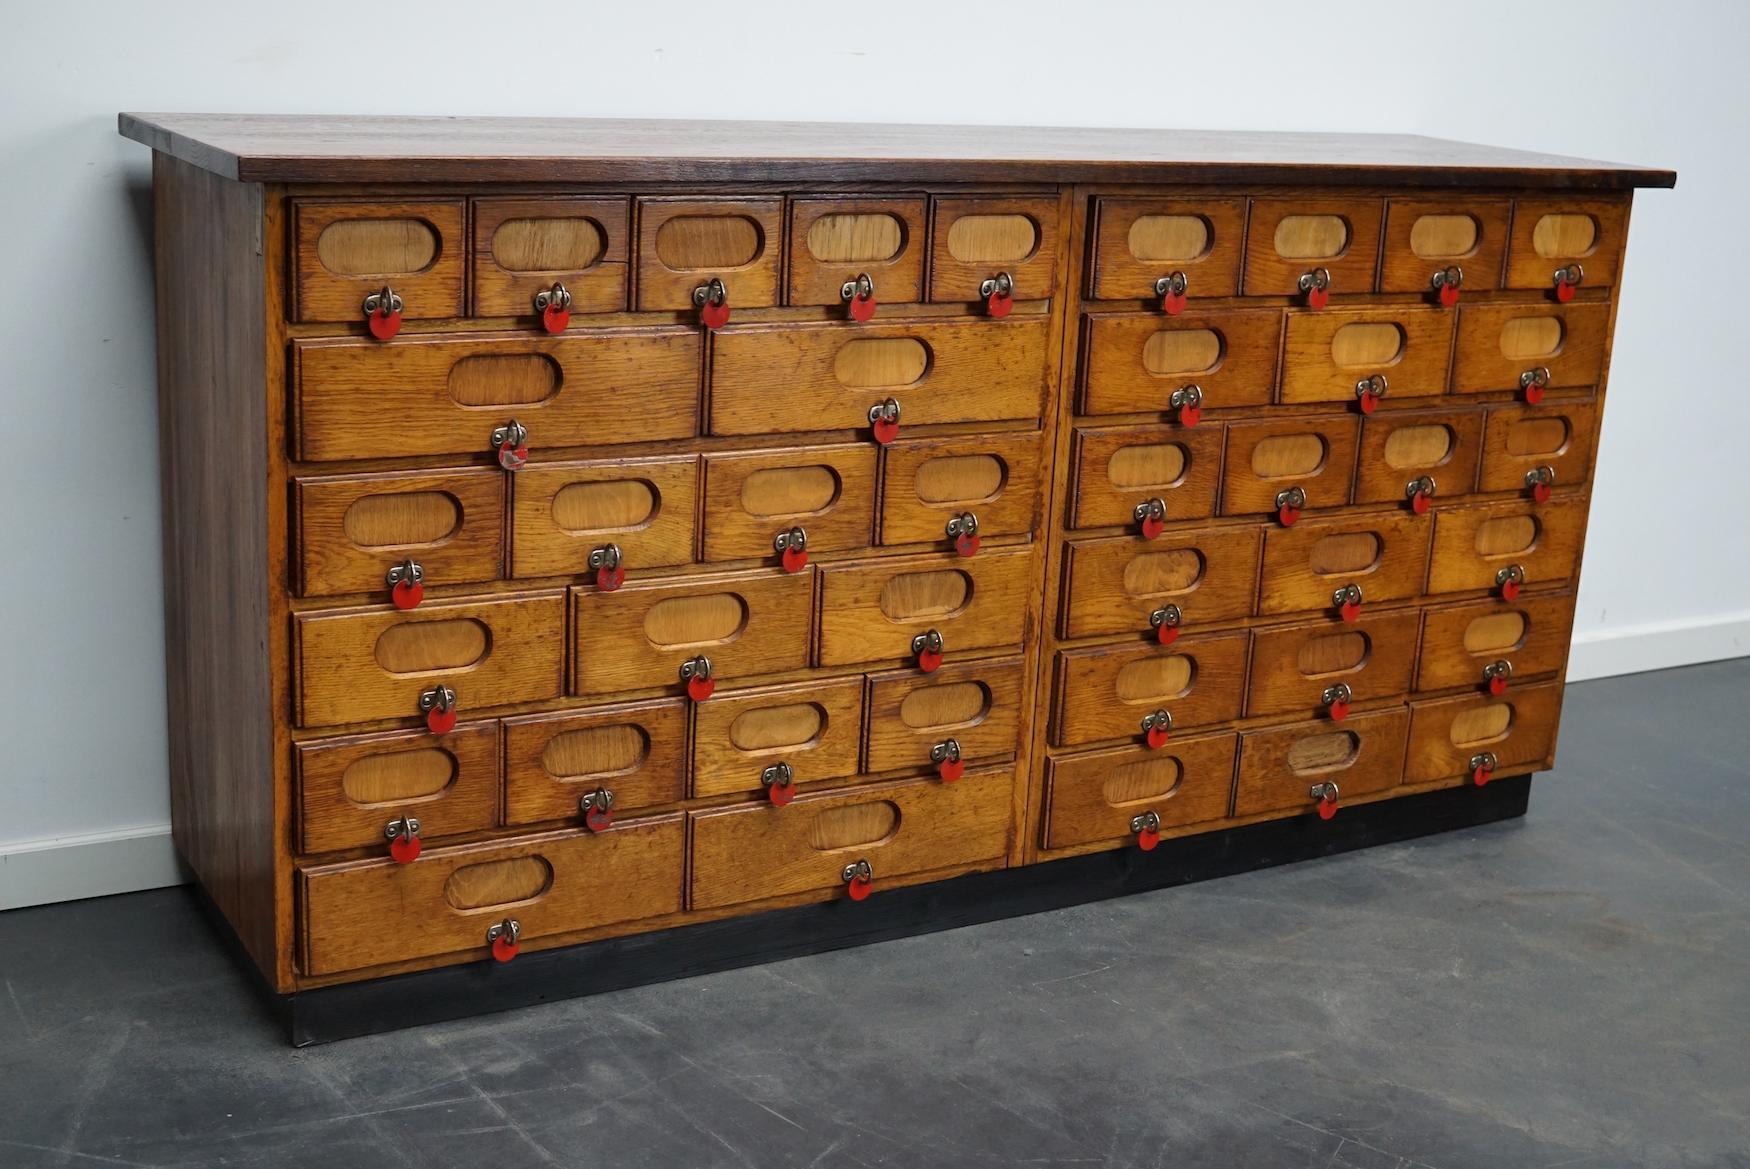 This apothecary cabinet was made circa 1940s in Germany and was later used in a hardware store in Belgium until recently. It features many drawers in different sizes with metal handles. The red coins were used to show that products were out of stock.